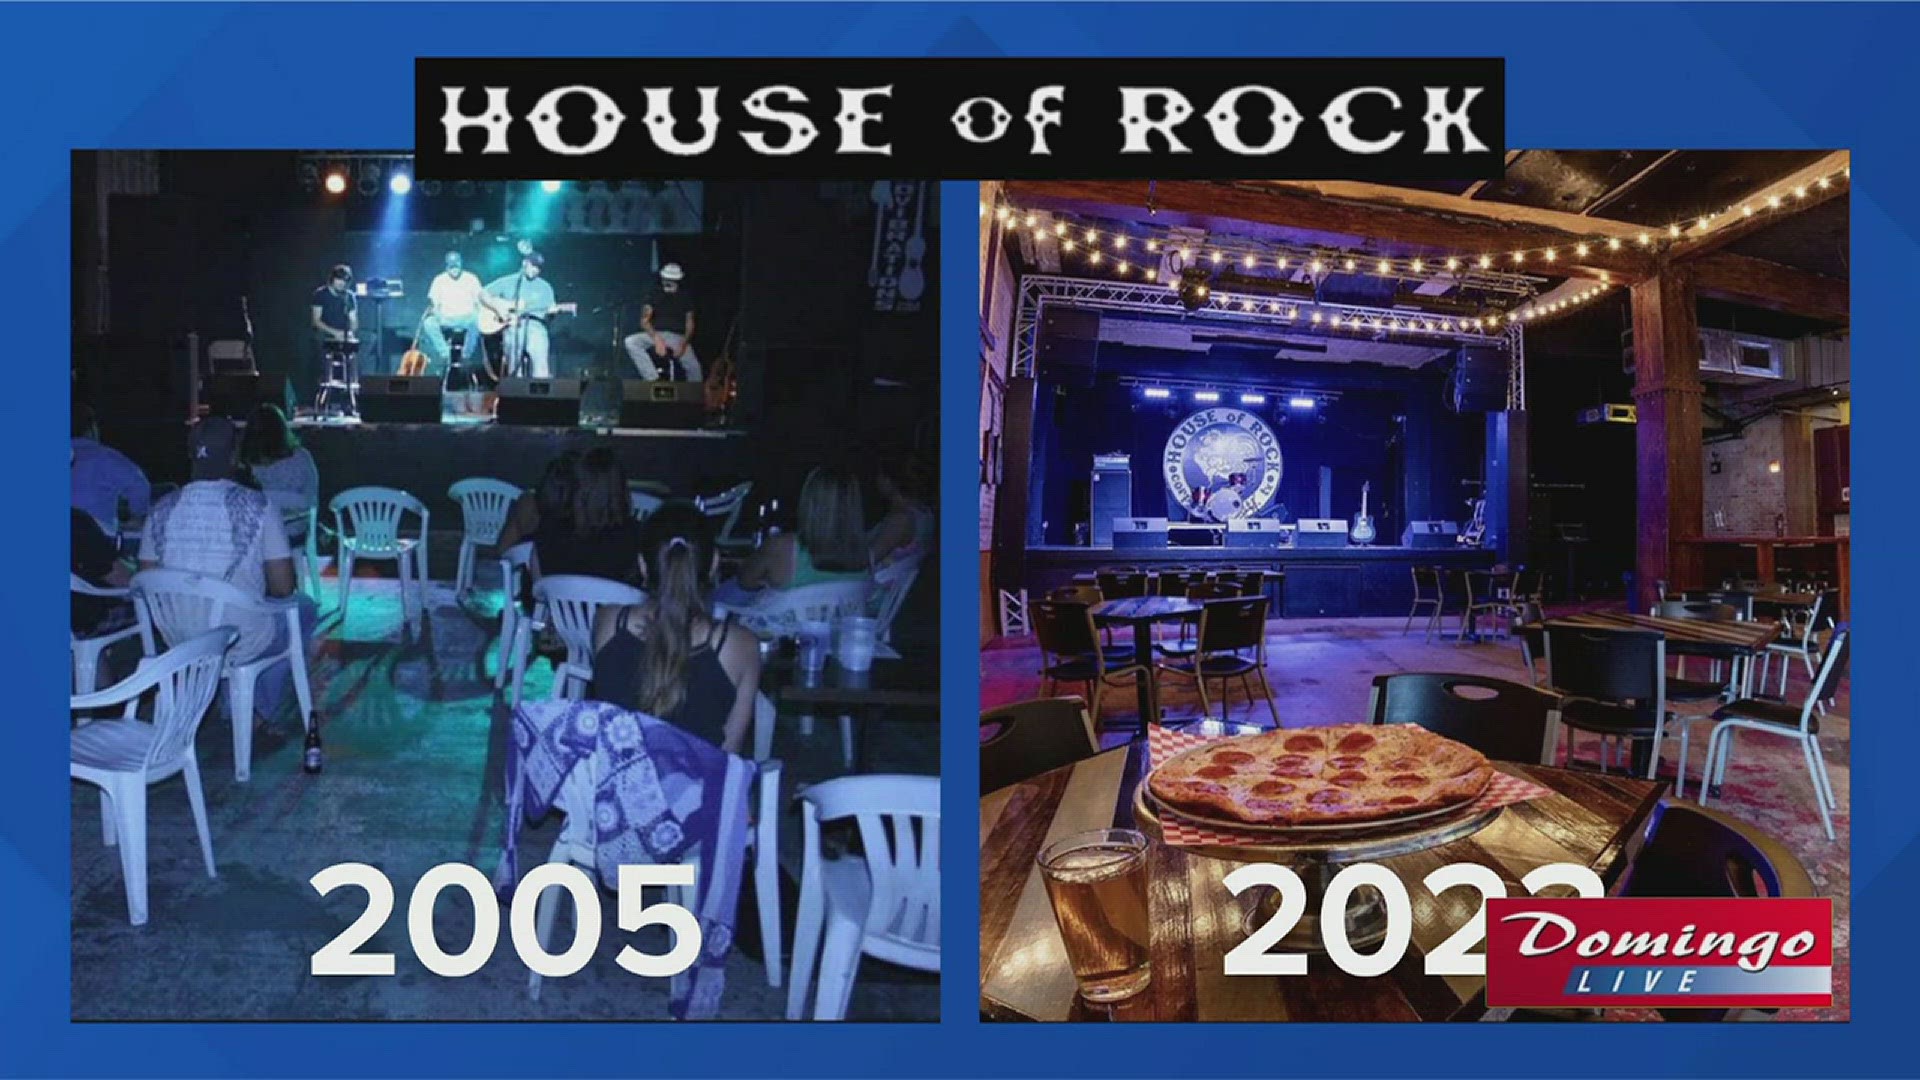 Casey Lain of the House of Rock joined us on Domingo Live to discuss how folks can celebrate 18 years of live music by attending their anniversary show on July 28.